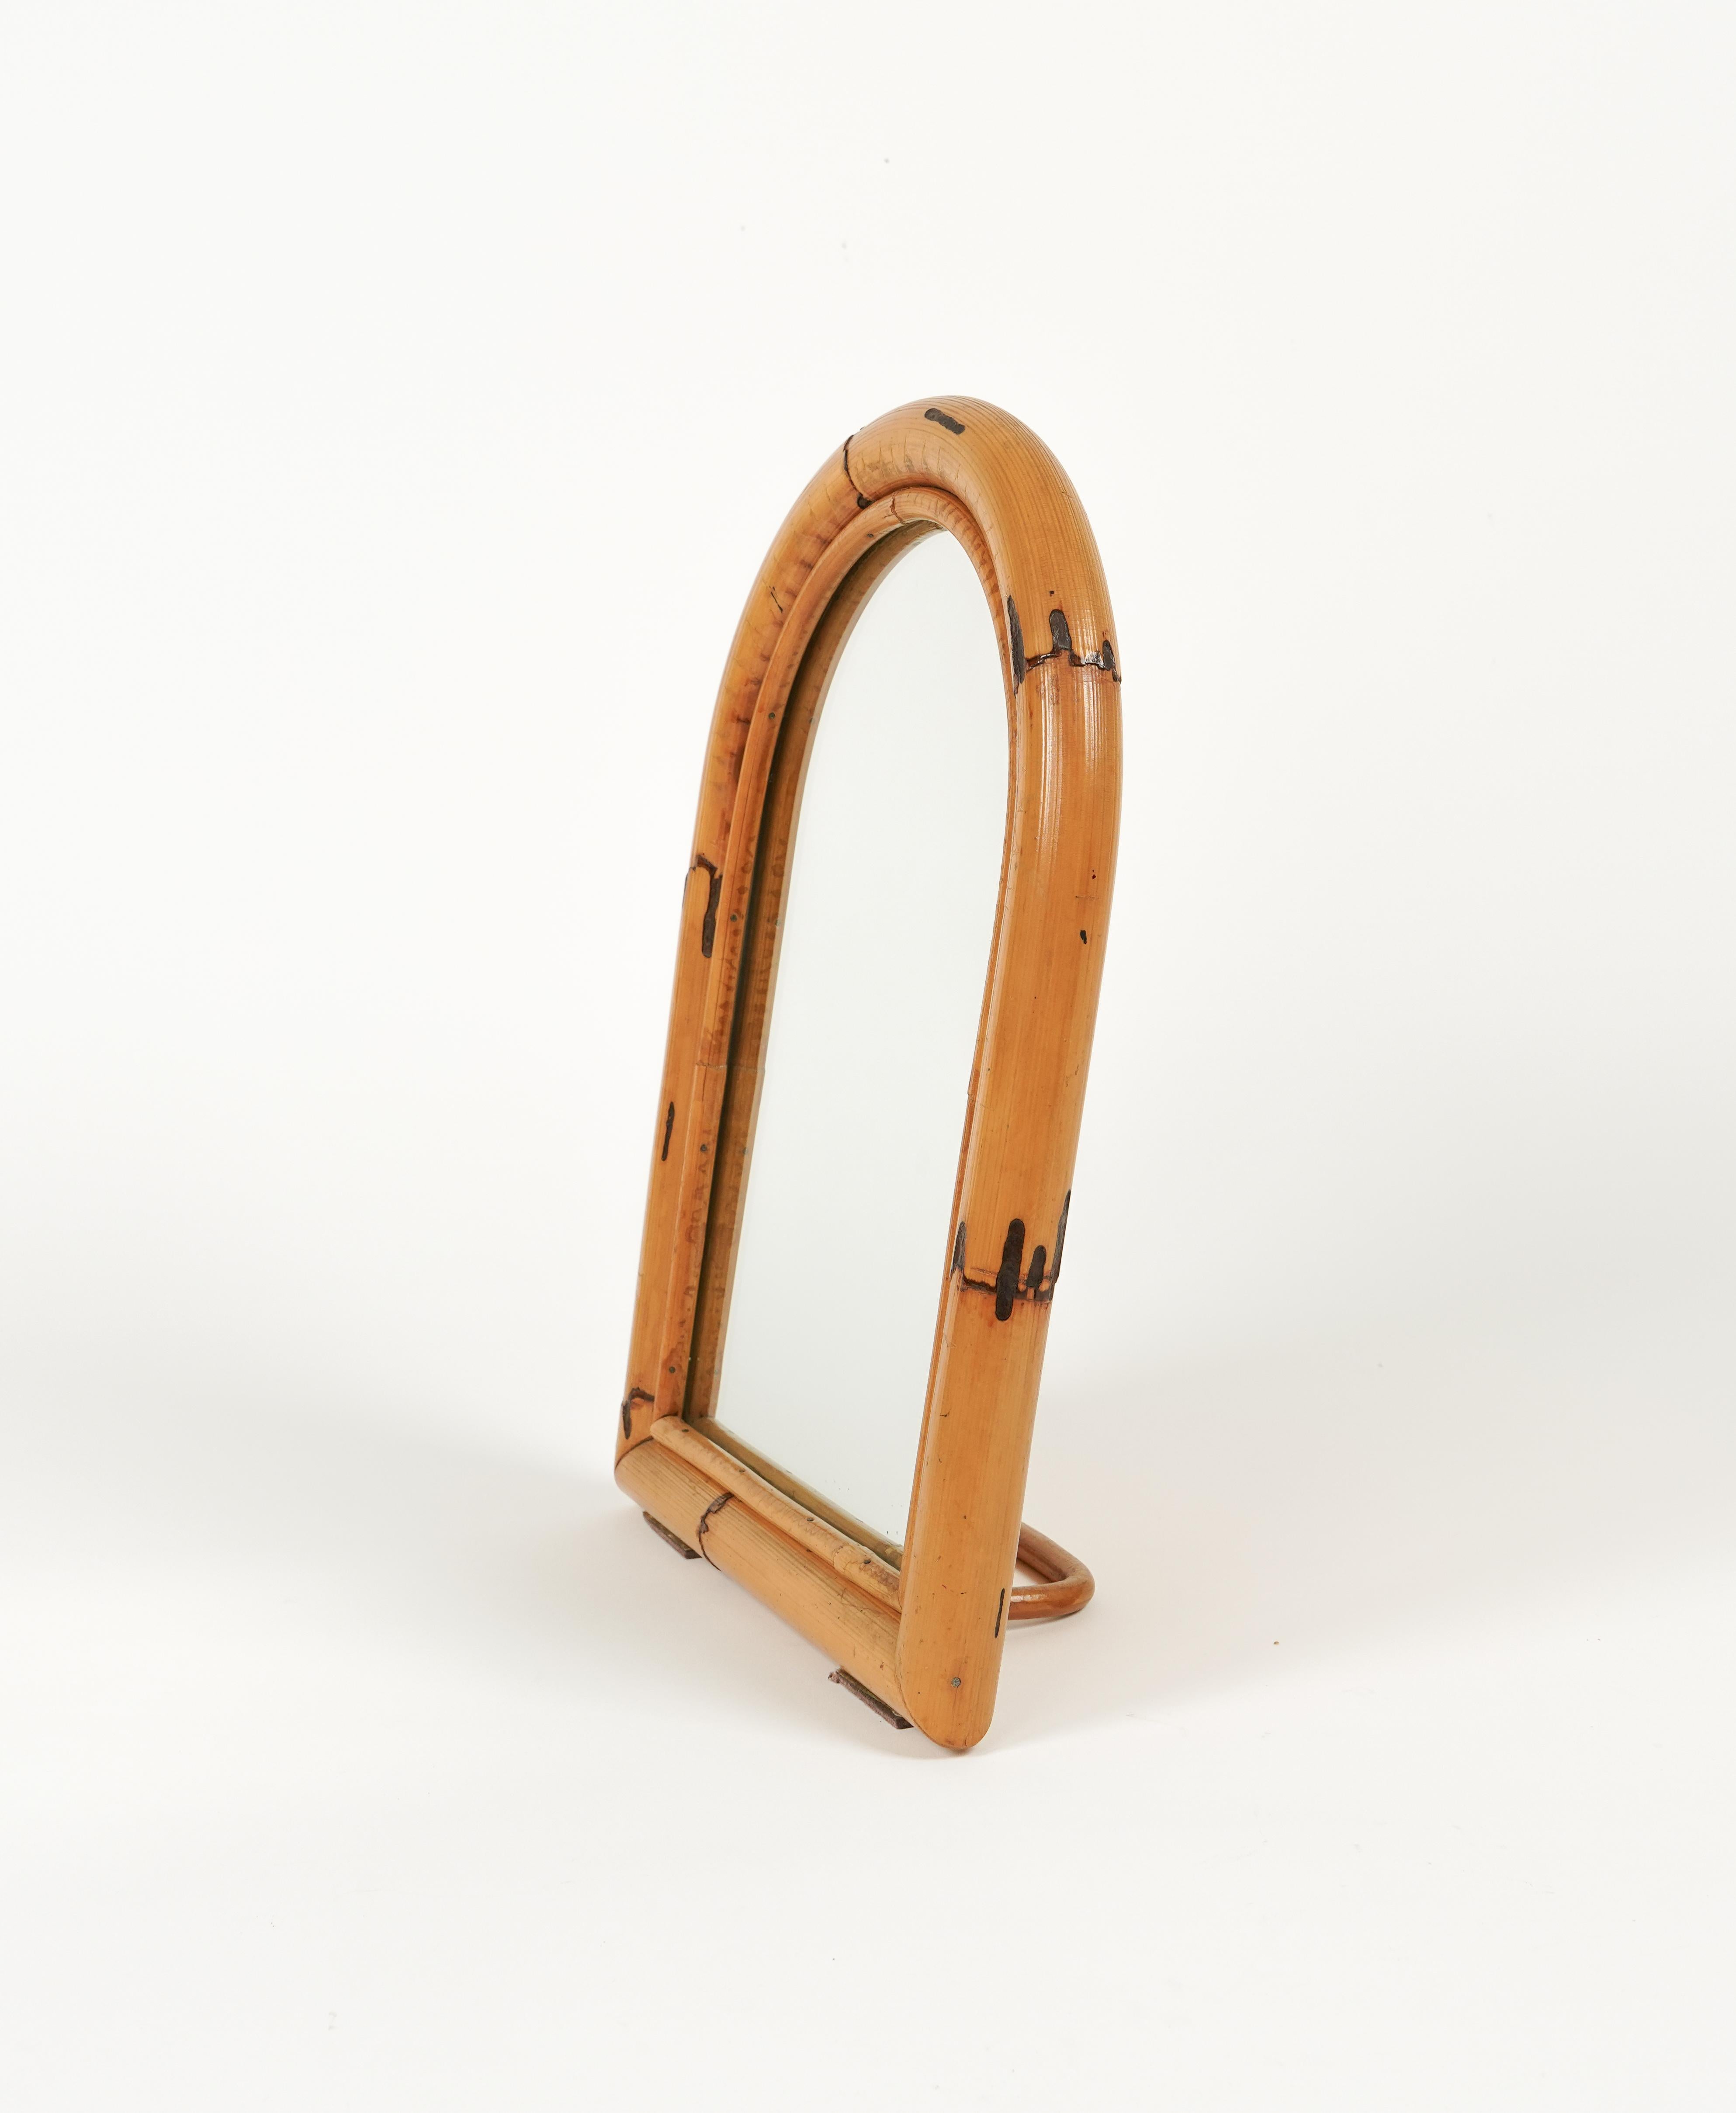 Midcentury beautiful arched table mirror framed with bamboo and rattan.

Made in Italy in the 1970s.
